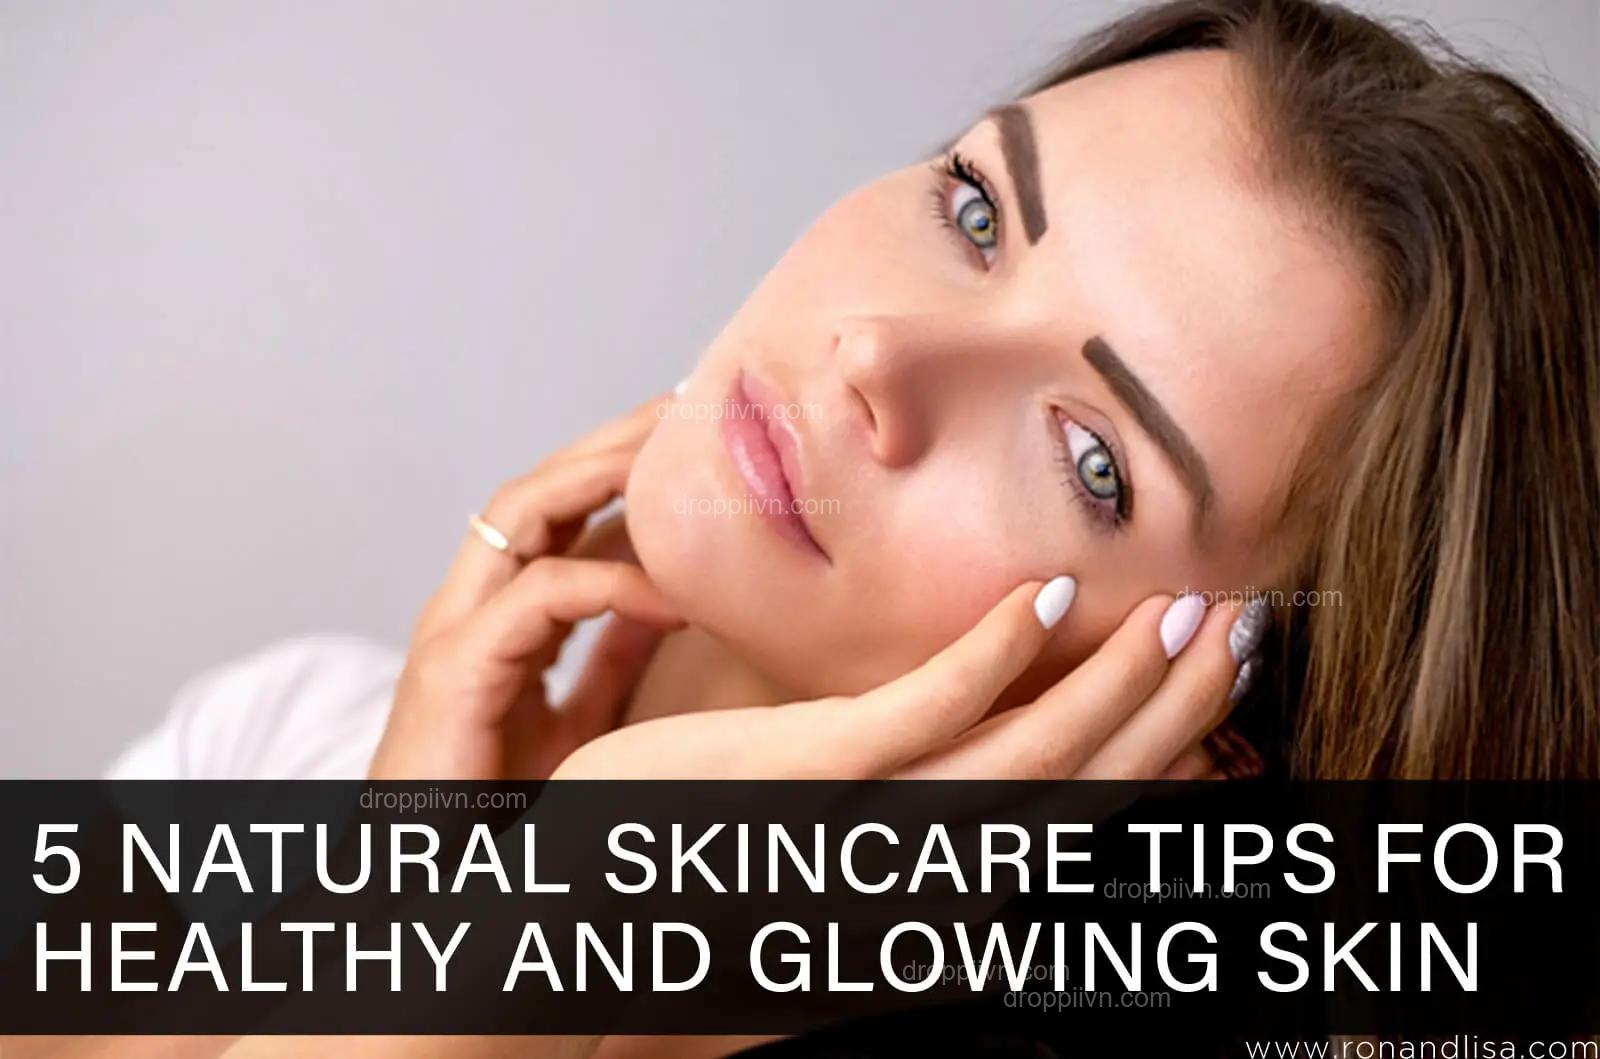 Tips to achieve healthy and glowing skin